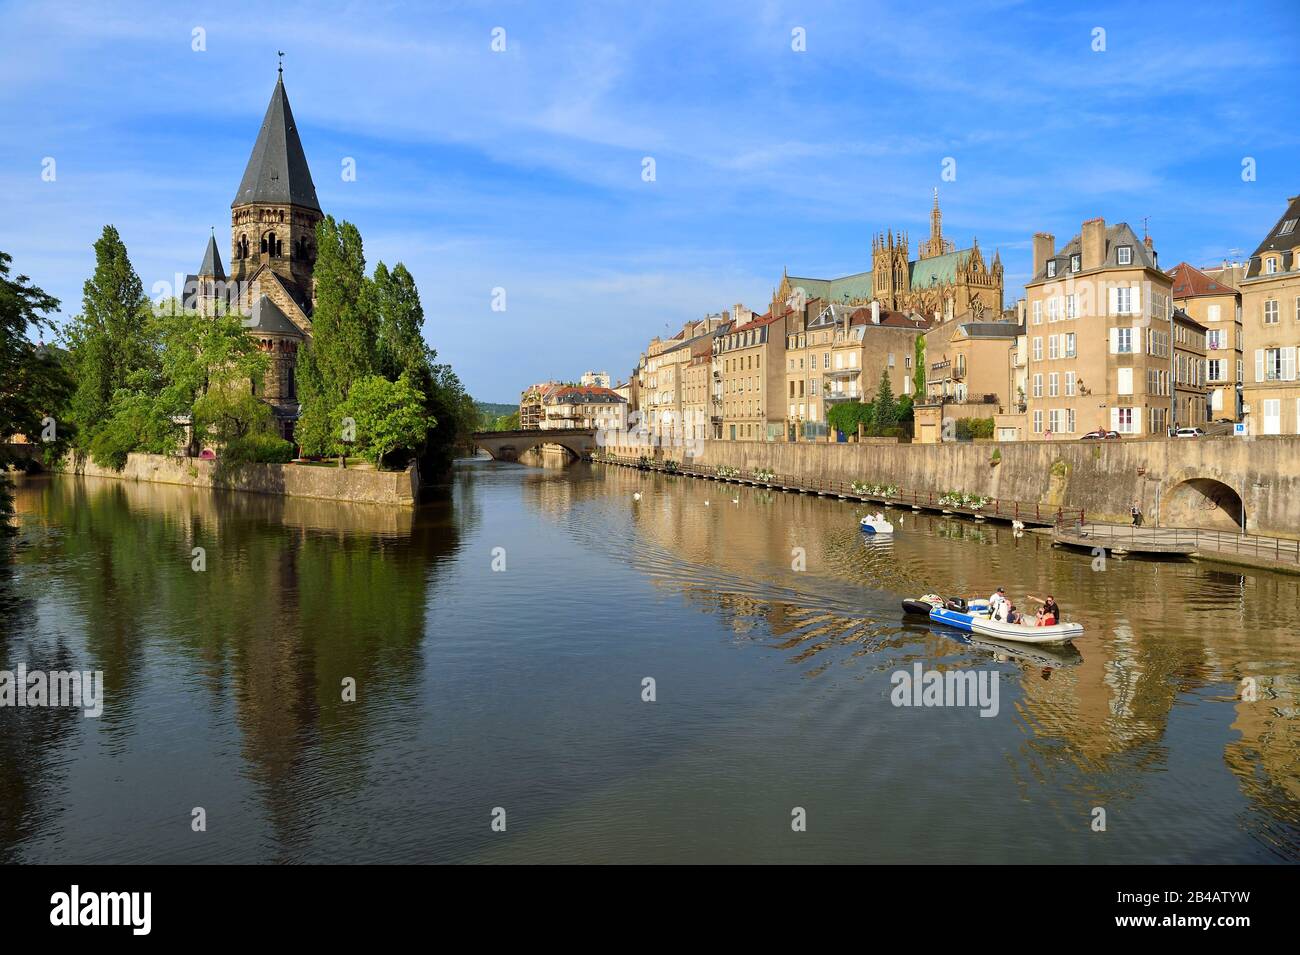 France, Moselle, Metz, Ile du Petit Saulcy, the Temple Neuf also called Eglise des allemands (the New Temple or Church of the Germans) reformed Prostestant Shrine and the canalized River Moselle banks with the Saint Etienne cathedral in the background right Stock Photo